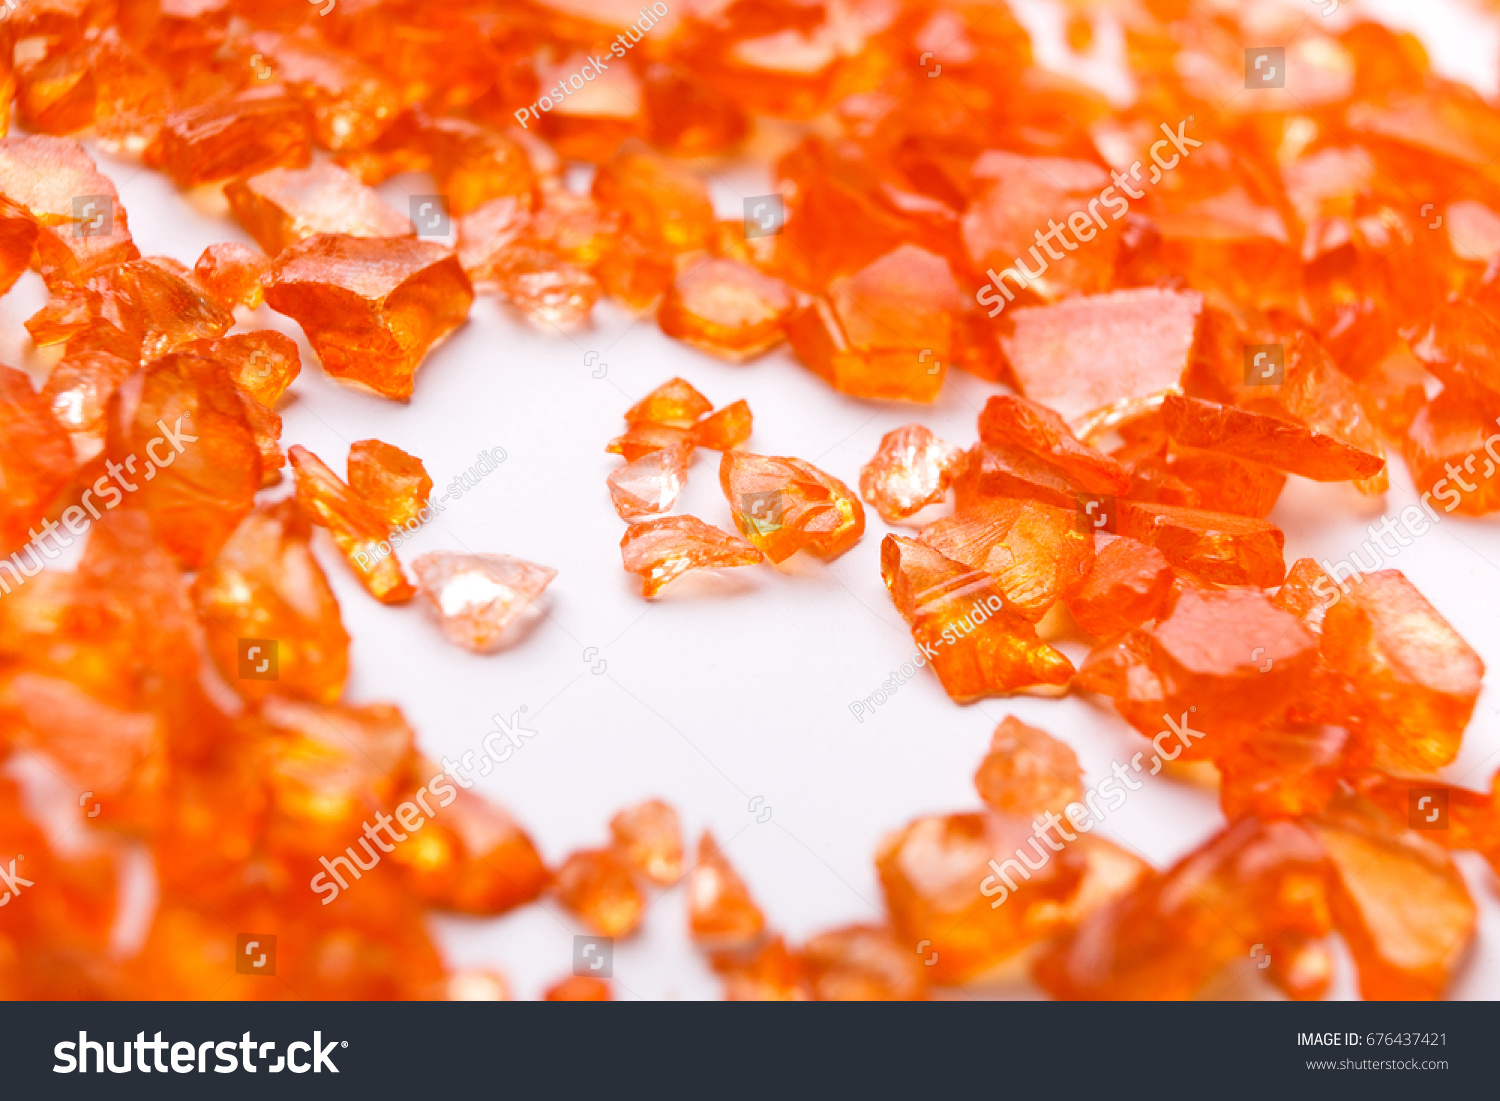 Orange Citrine gemstones on white background. Bright backdrop of natural jewels with free space for text, close up. #676437421